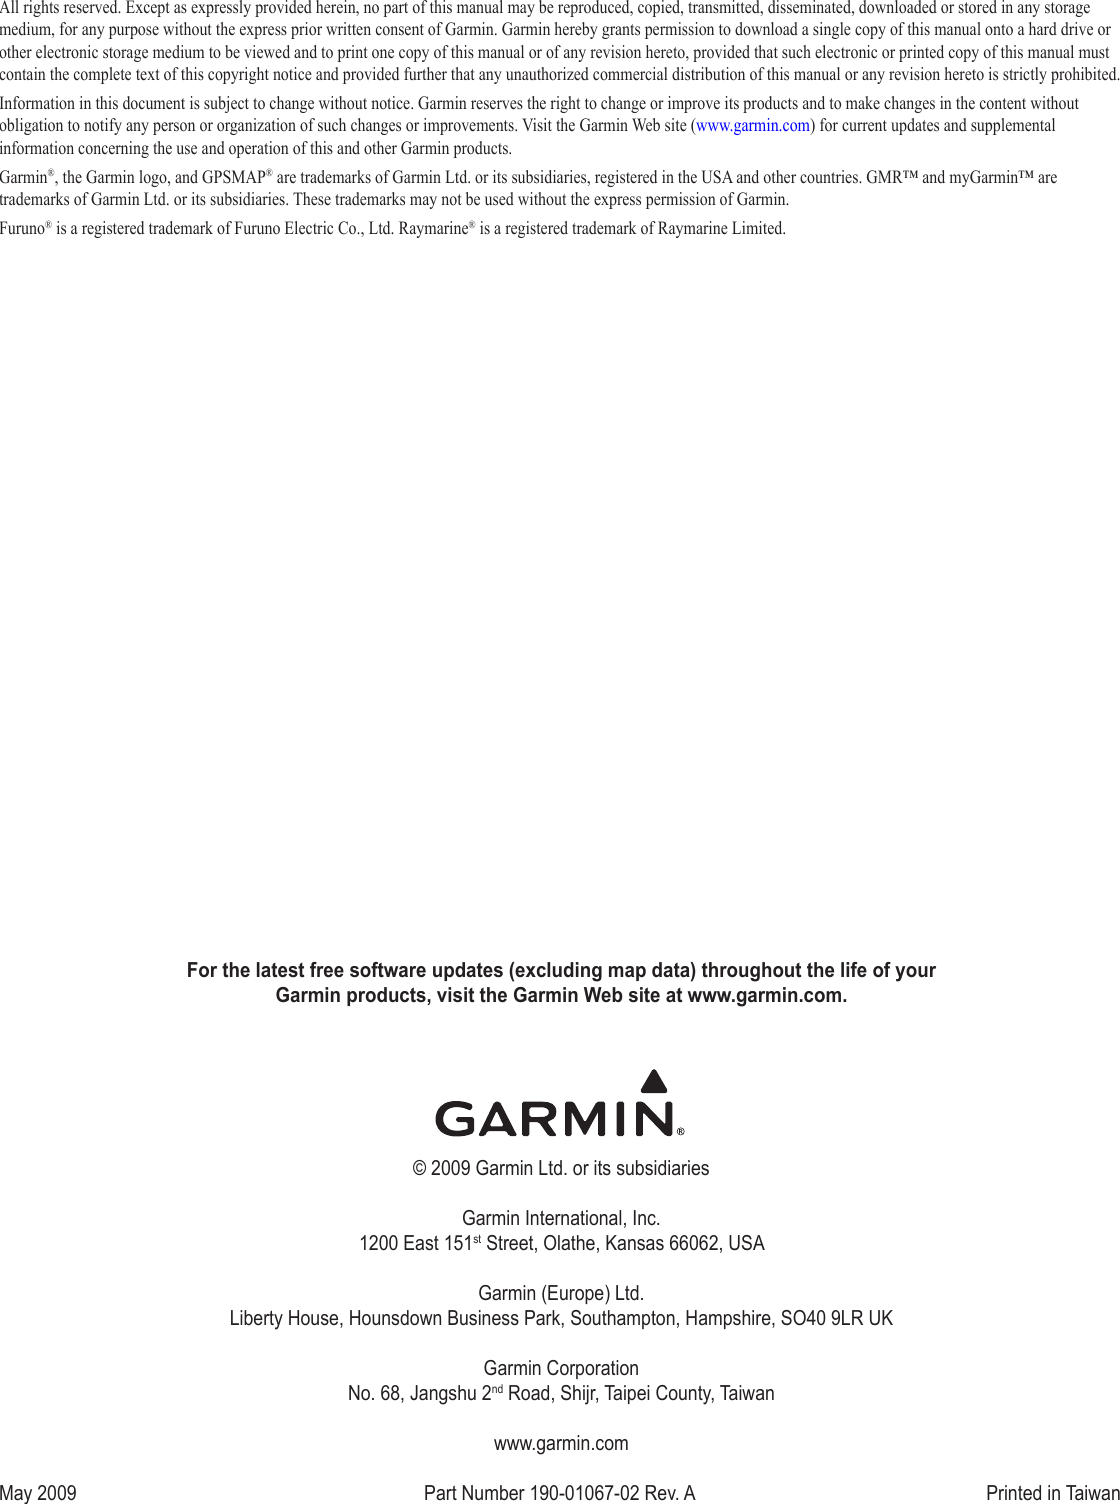 For the latest free software updates (excluding map data) throughout the life of your  Garmin products, visit the Garmin Web site at www.garmin.com.© 2009 Garmin Ltd. or its subsidiariesGarmin International, Inc. 1200 East 151st Street, Olathe, Kansas 66062, USAGarmin (Europe) Ltd. Liberty House, Hounsdown Business Park, Southampton, Hampshire, SO40 9LR UKGarmin Corporation No. 68, Jangshu 2nd Road, Shijr, Taipei County, Taiwanwww.garmin.comMay 2009  Part Number 190-01067-02 Rev. A  Printed in TaiwanAll rights reserved. Except as expressly provided herein, no part of this manual may be reproduced, copied, transmitted, disseminated, downloaded or stored in any storage medium, for any purpose without the express prior written consent of Garmin. Garmin hereby grants permission to download a single copy of this manual onto a hard drive or other electronic storage medium to be viewed and to print one copy of this manual or of any revision hereto, provided that such electronic or printed copy of this manual must contain the complete text of this copyright notice and provided further that any unauthorized commercial distribution of this manual or any revision hereto is strictly prohibited.Information in this document is subject to change without notice. Garmin reserves the right to change or improve its products and to make changes in the content without obligation to notify any person or organization of such changes or improvements. Visit the Garmin Web site (www.garmin.com) for current updates and supplemental information concerning the use and operation of this and other Garmin products.Garmin®, the Garmin logo, and GPSMAP® are trademarks of Garmin Ltd. or its subsidiaries, registered in the USA and other countries. GMR™ and myGarmin™ are trademarks of Garmin Ltd. or its subsidiaries. These trademarks may not be used without the express permission of Garmin.Furuno® is a registered trademark of Furuno Electric Co., Ltd. Raymarine® is a registered trademark of Raymarine Limited.